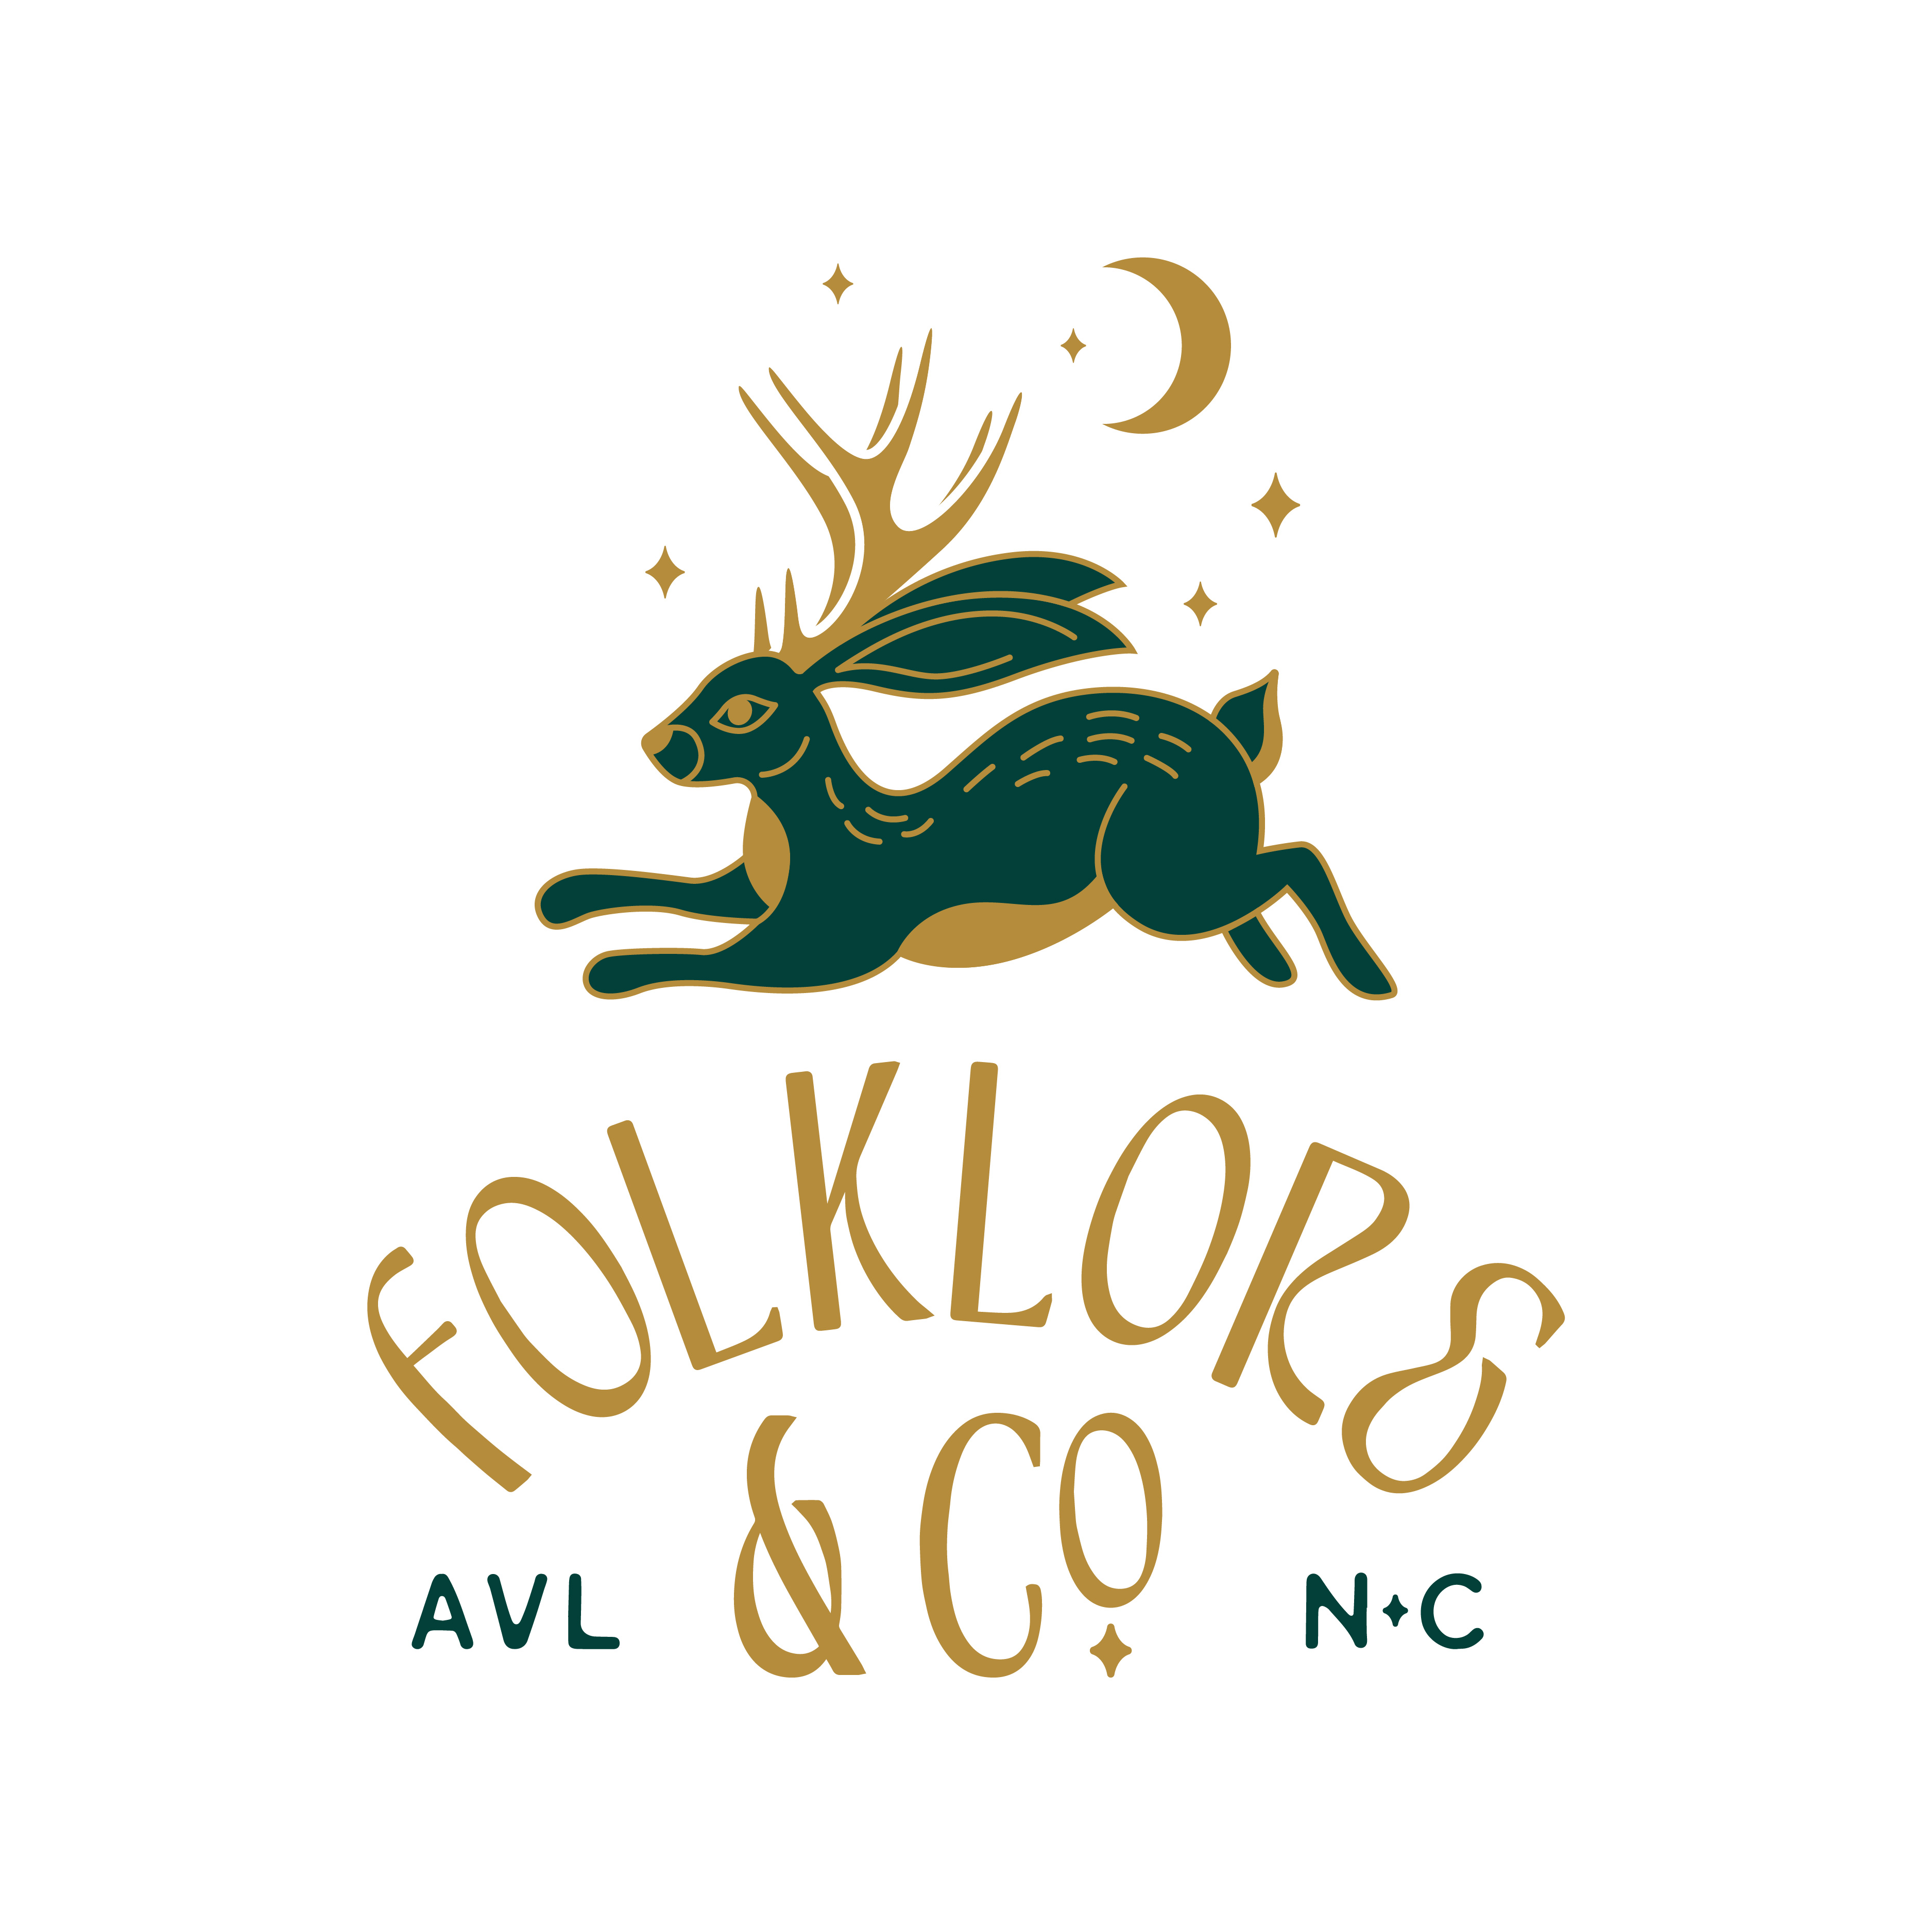 Folklore & Co Logo Concept logo design by logo designer Taylor Sutherland Design Co for your inspiration and for the worlds largest logo competition